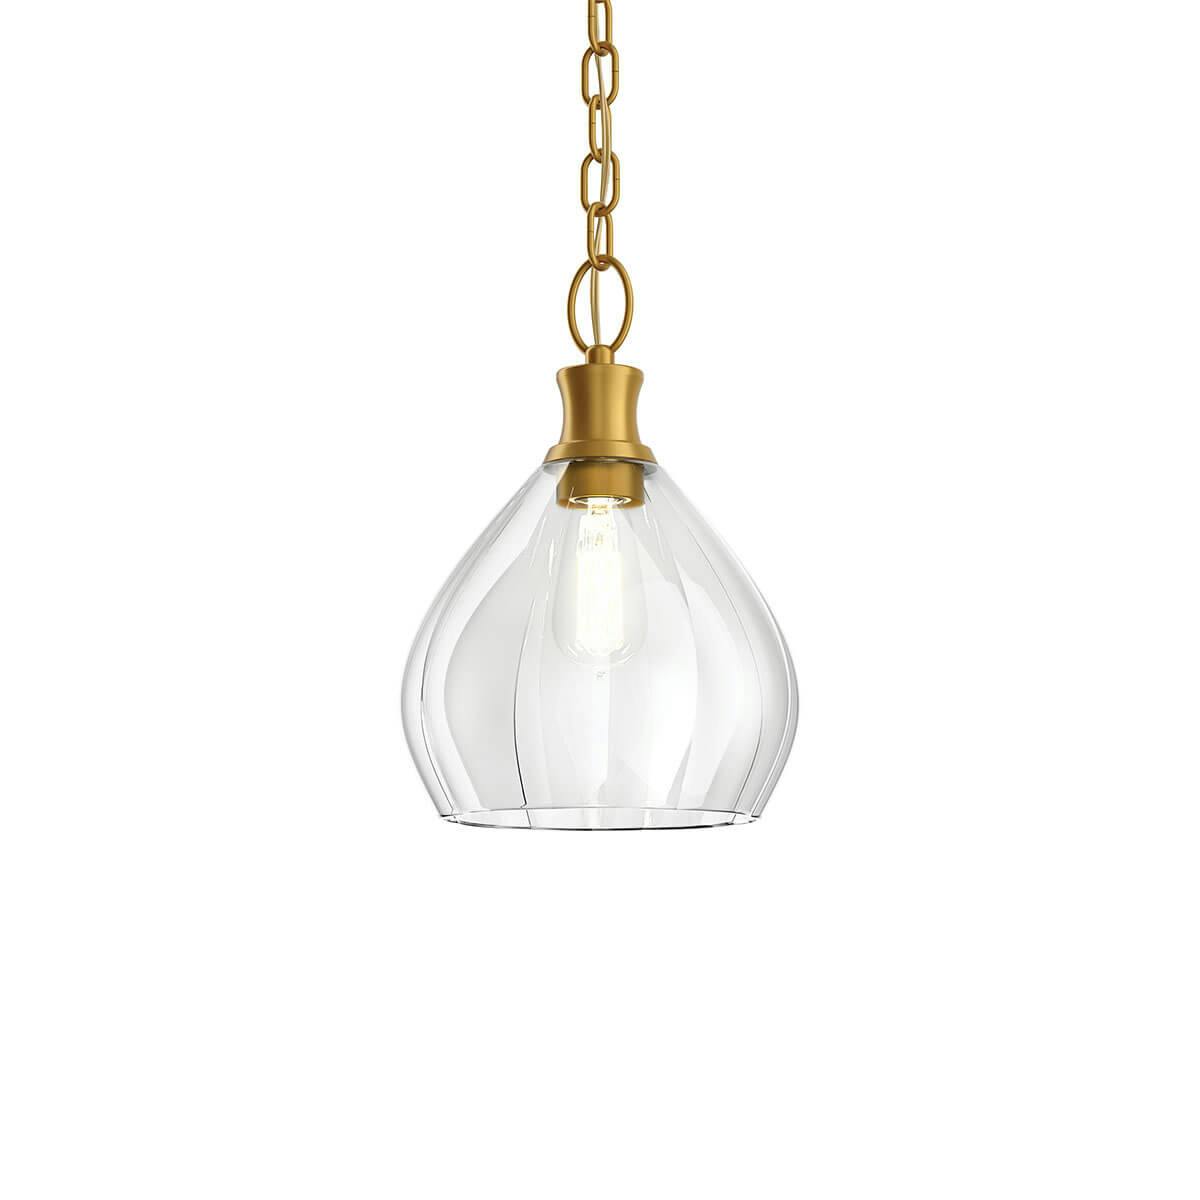 Merriam 8" 1 Light Pendant Classic Gold without the canopy on a white background